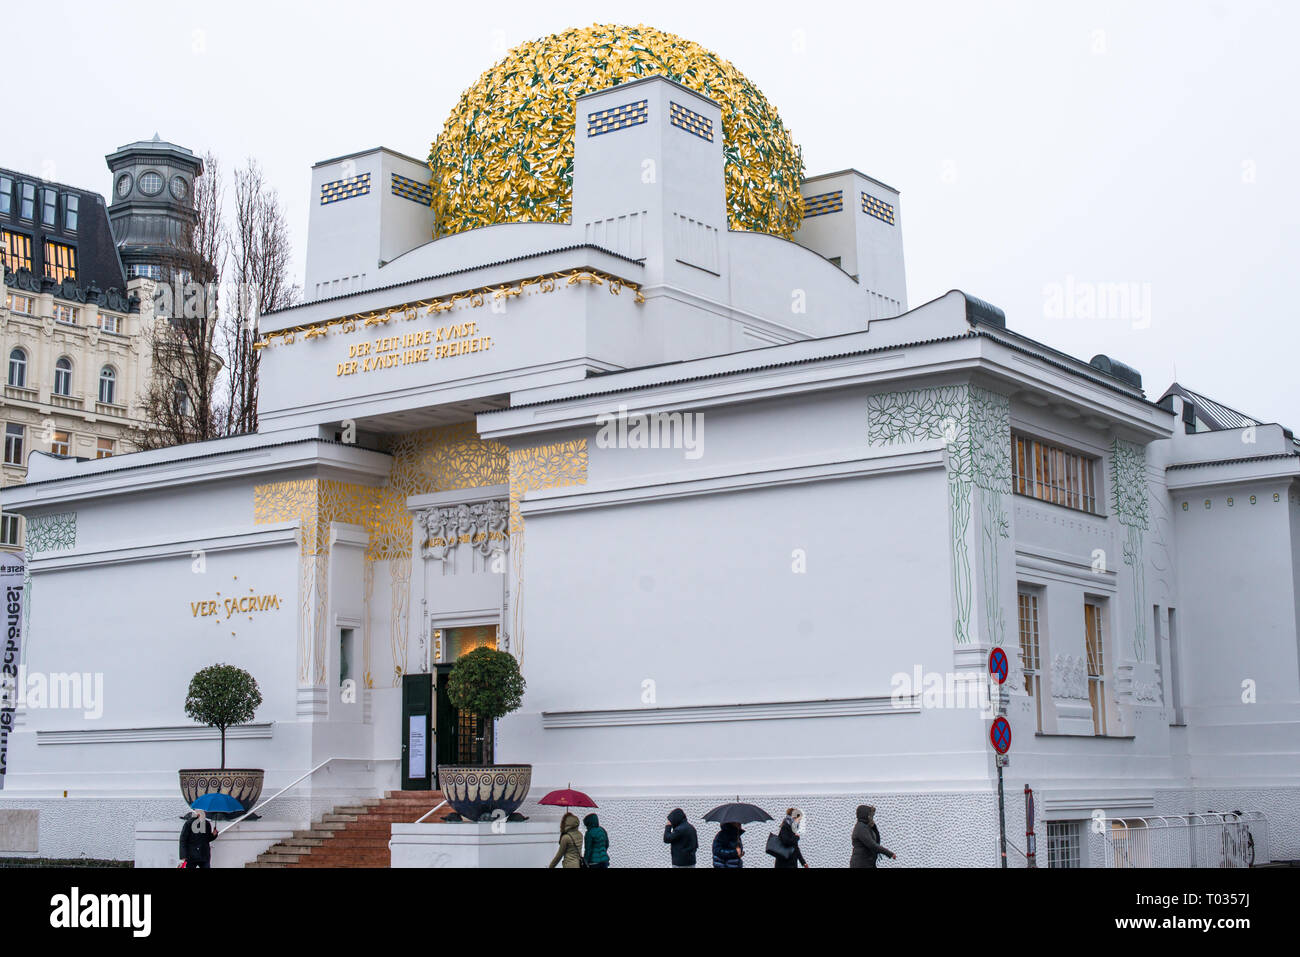 Secession (Sezession) Building Vienna, by J.M. Olbrich built 1897-8 as exhibition gallery for artists of the Vienna Secession. Austria. Stock Photo